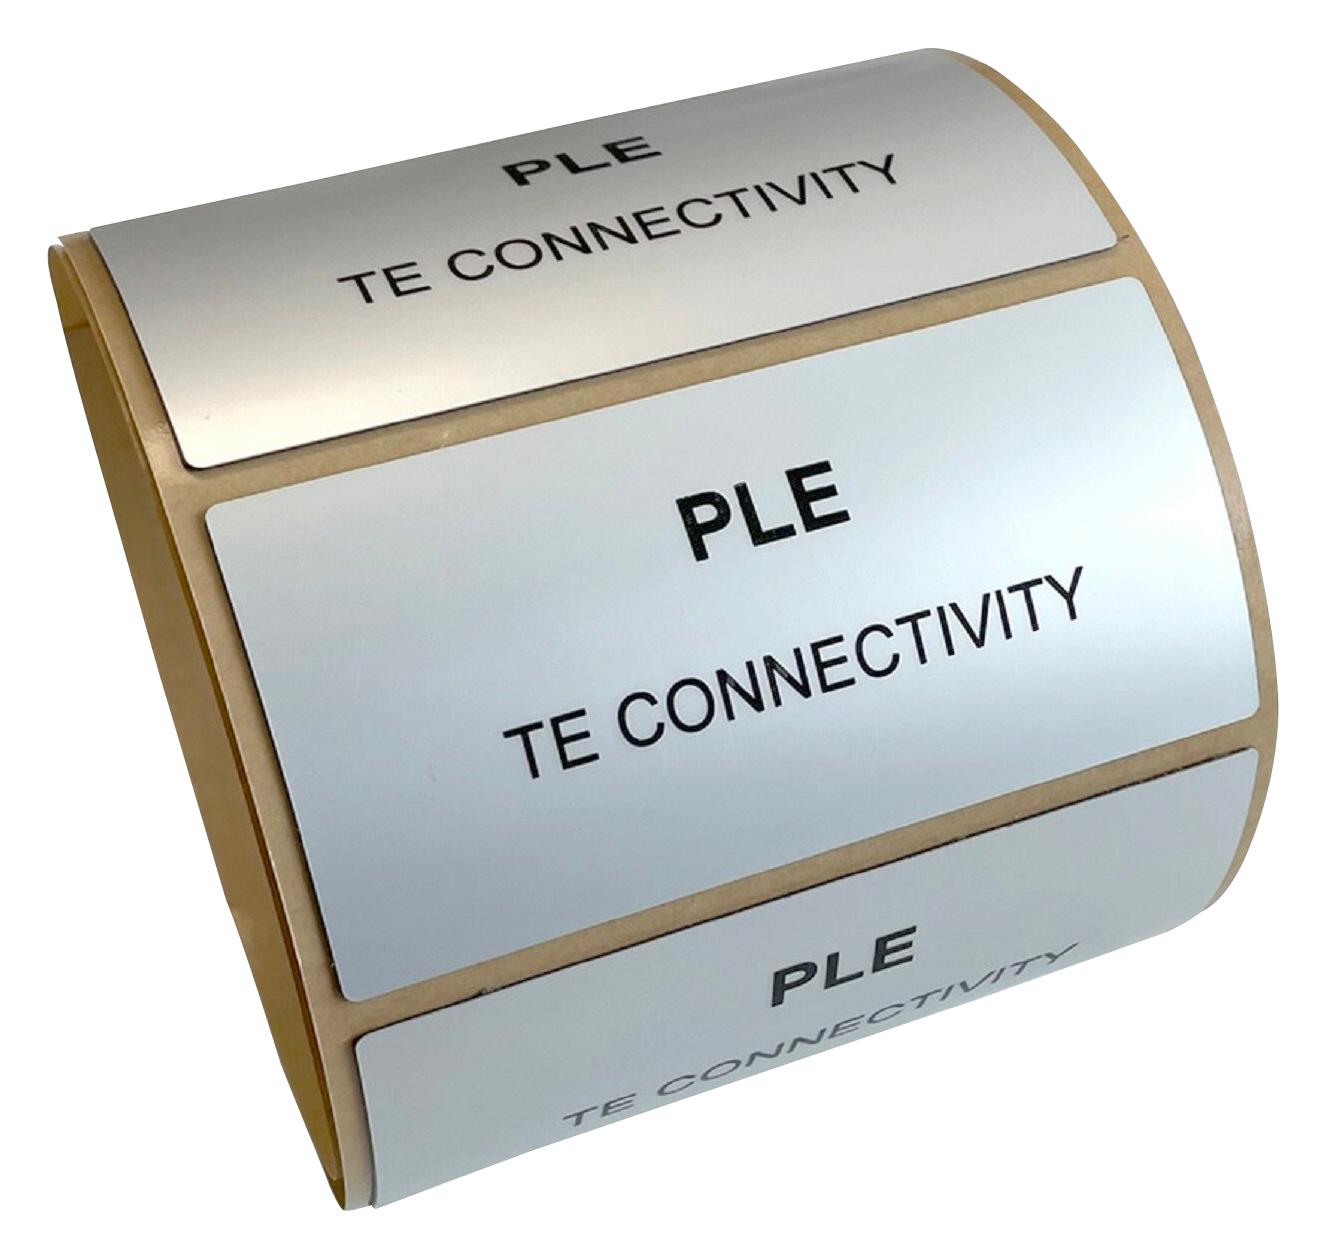 Entrelec TE Connectivity Ple-035018-Gy-0.625 Label, Polyester, Grey, 35mm X 18mm